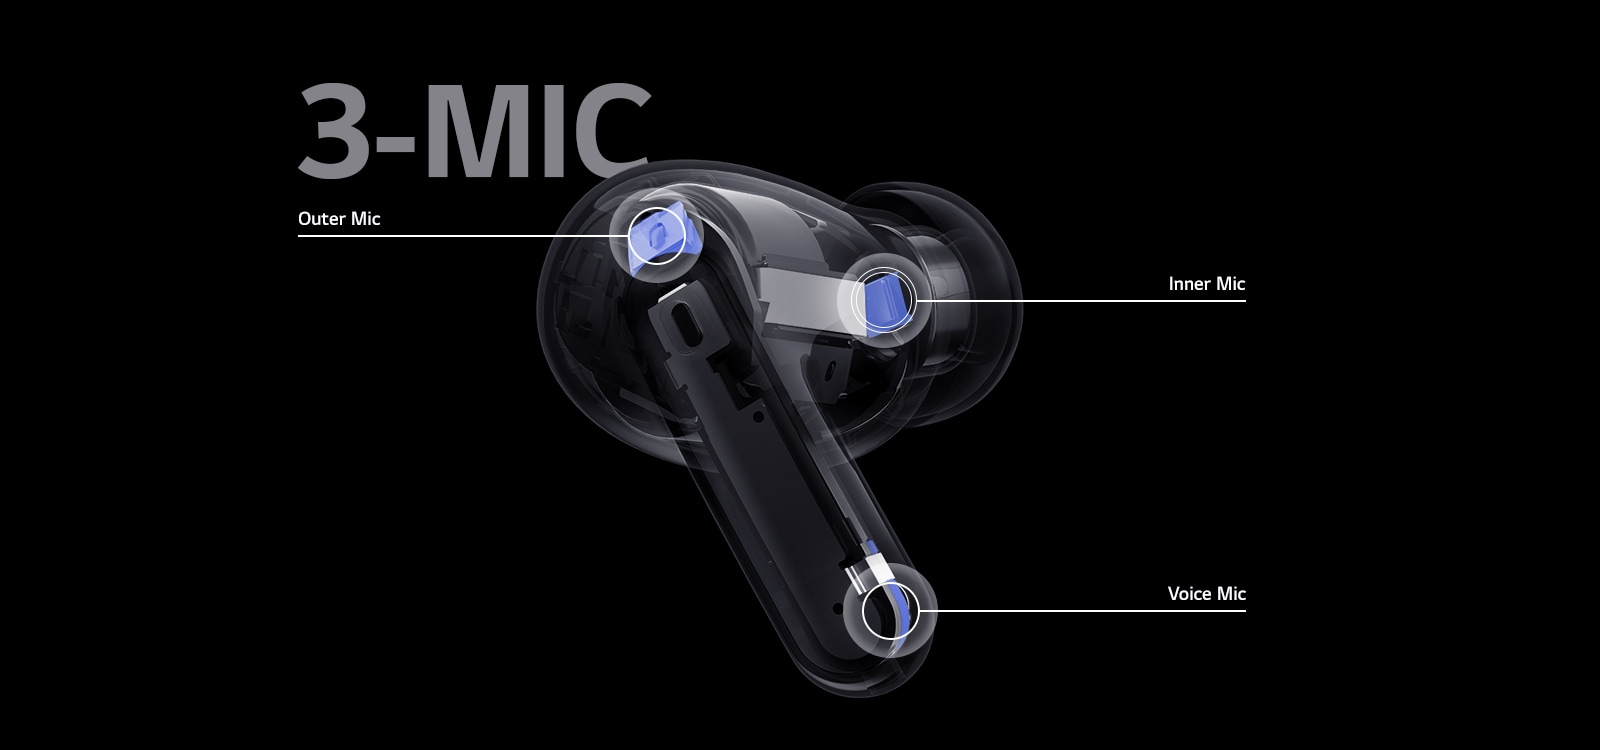 The image of the perspective earbuds contains the position of the Outer mic, Inner mic, and Voice mic along with the word 3-MIC on the earbuds image.